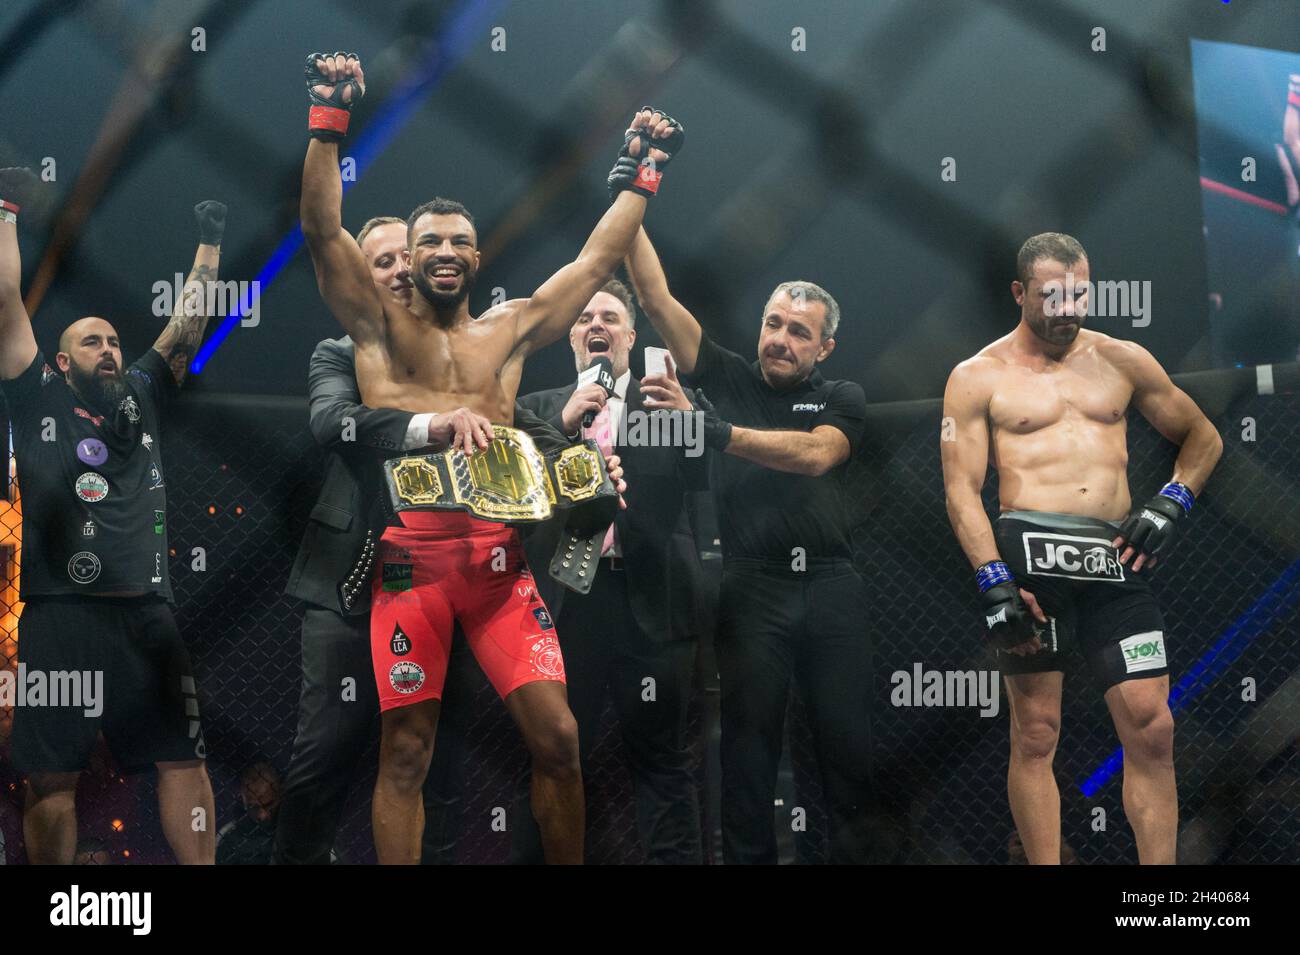 Paris, France. 30th Oct, 2021. Franceâ€™s Mixed Martial Arts (MMA) fighter  Karl Amoussou (L) wins the Hexagone MMA championship belt after his victory  against Brazilâ€™s Mixed Martial Arts (MMA) fighter Andre Santos (